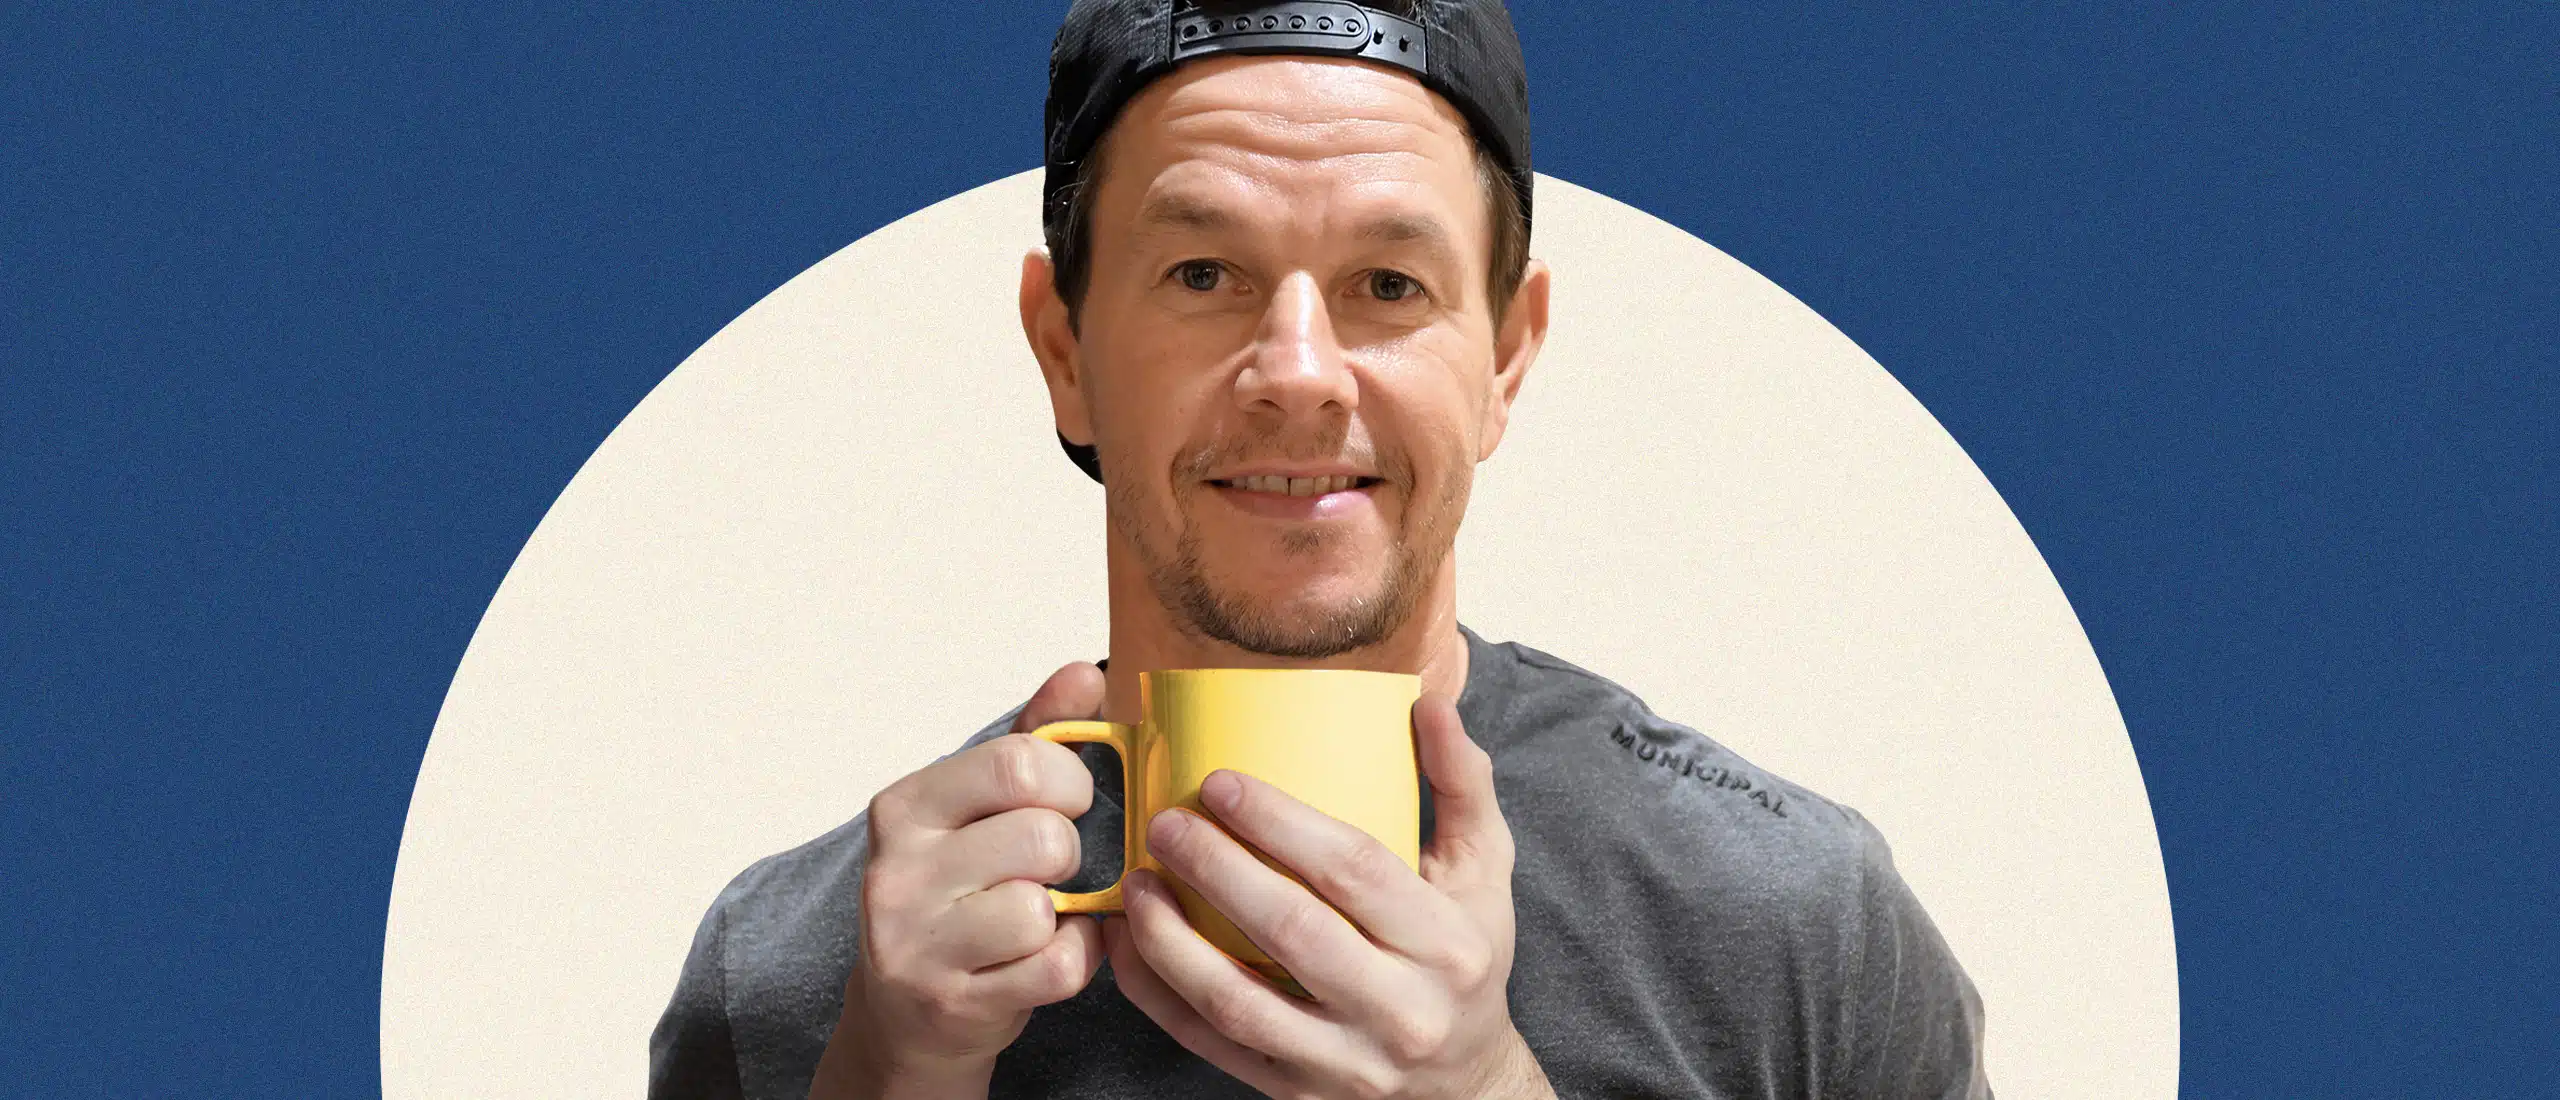 Mark Walhberg holding a cup of coffee lovingly